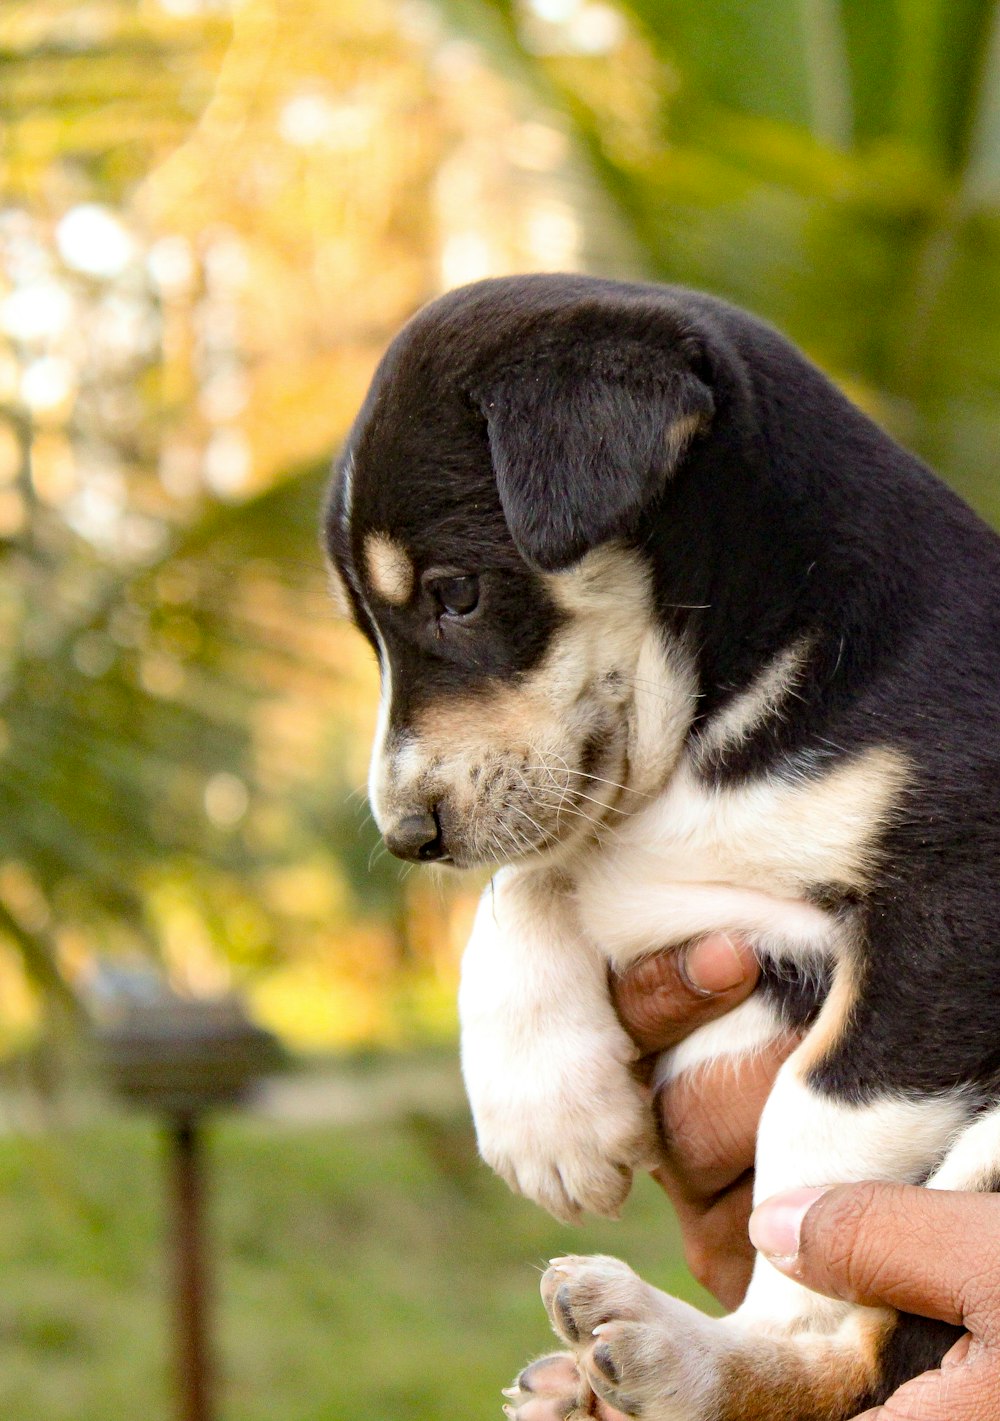 a small black and white puppy being held by a person